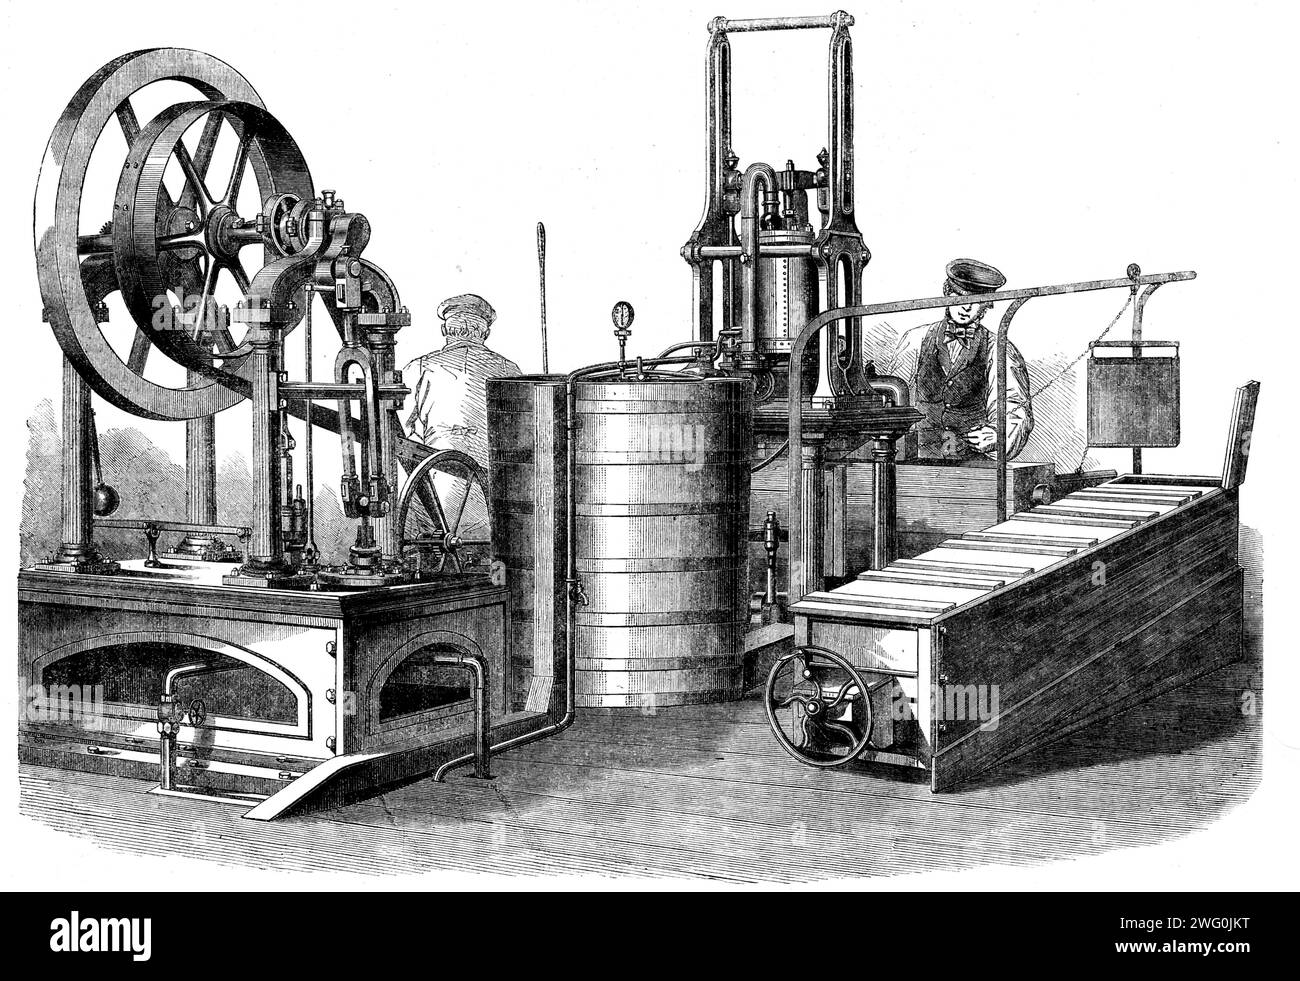 The International Exhibition: Siebes' patent ice-making machine, from a photograph by the London Stereoscopic Company, 1862. 'Ice is now getting to be much more generally used than formerly; the demand for it is constantly increasing, and we have no doubt that in a few years a block of ice proportioned to the requirements of the family will be delivered every morning through the summer months as regularly as is now the case with milk...The great point in this machine is its perfect independence of all external, thermal, and atmospheric influences, which renders it equally effective in any clim Stock Photo